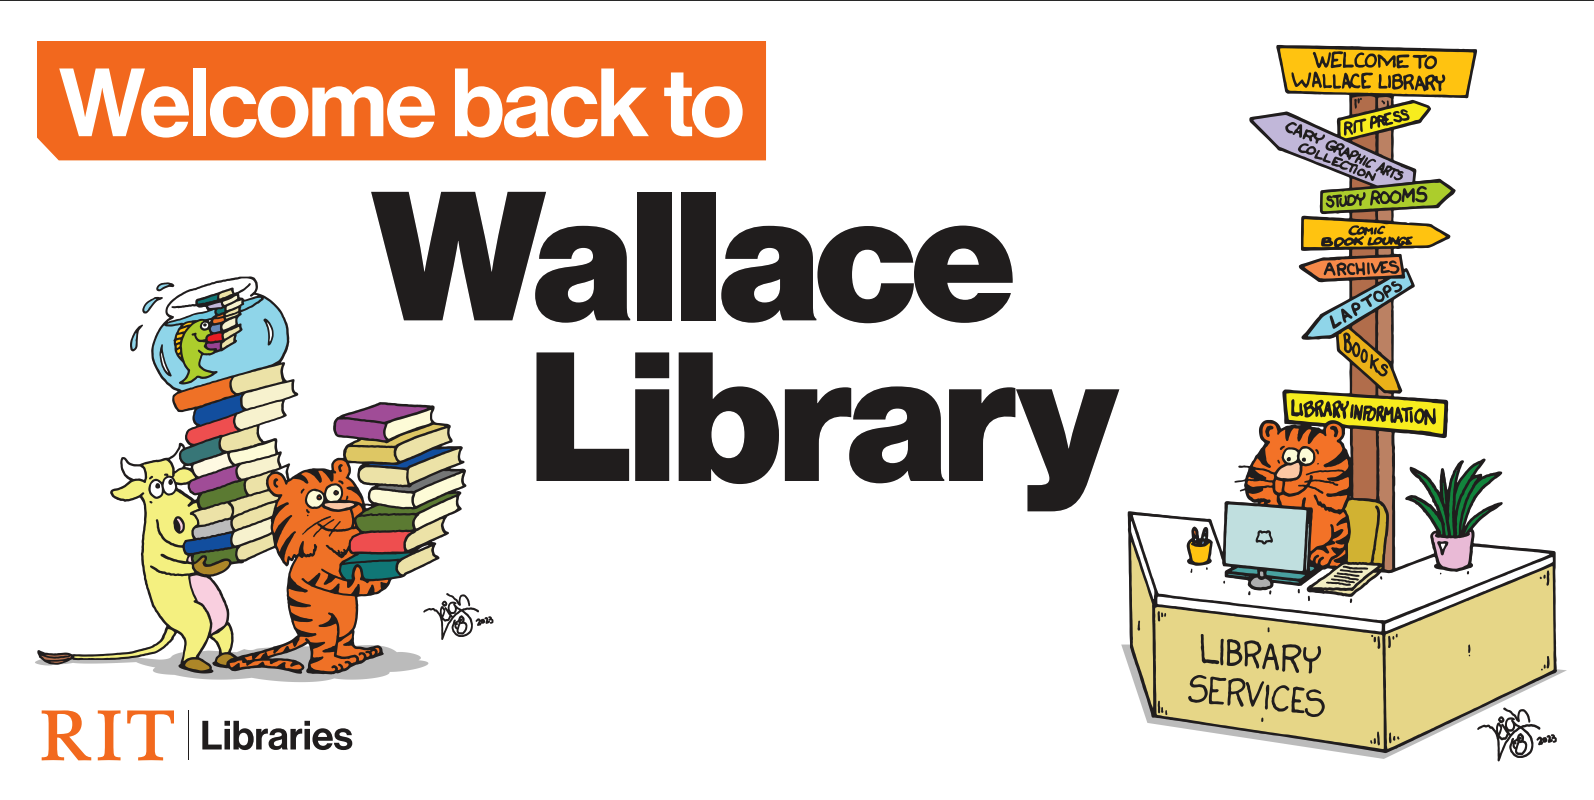 Image stating welcome back to wallace library with cartoon tiger, cow, and fish.